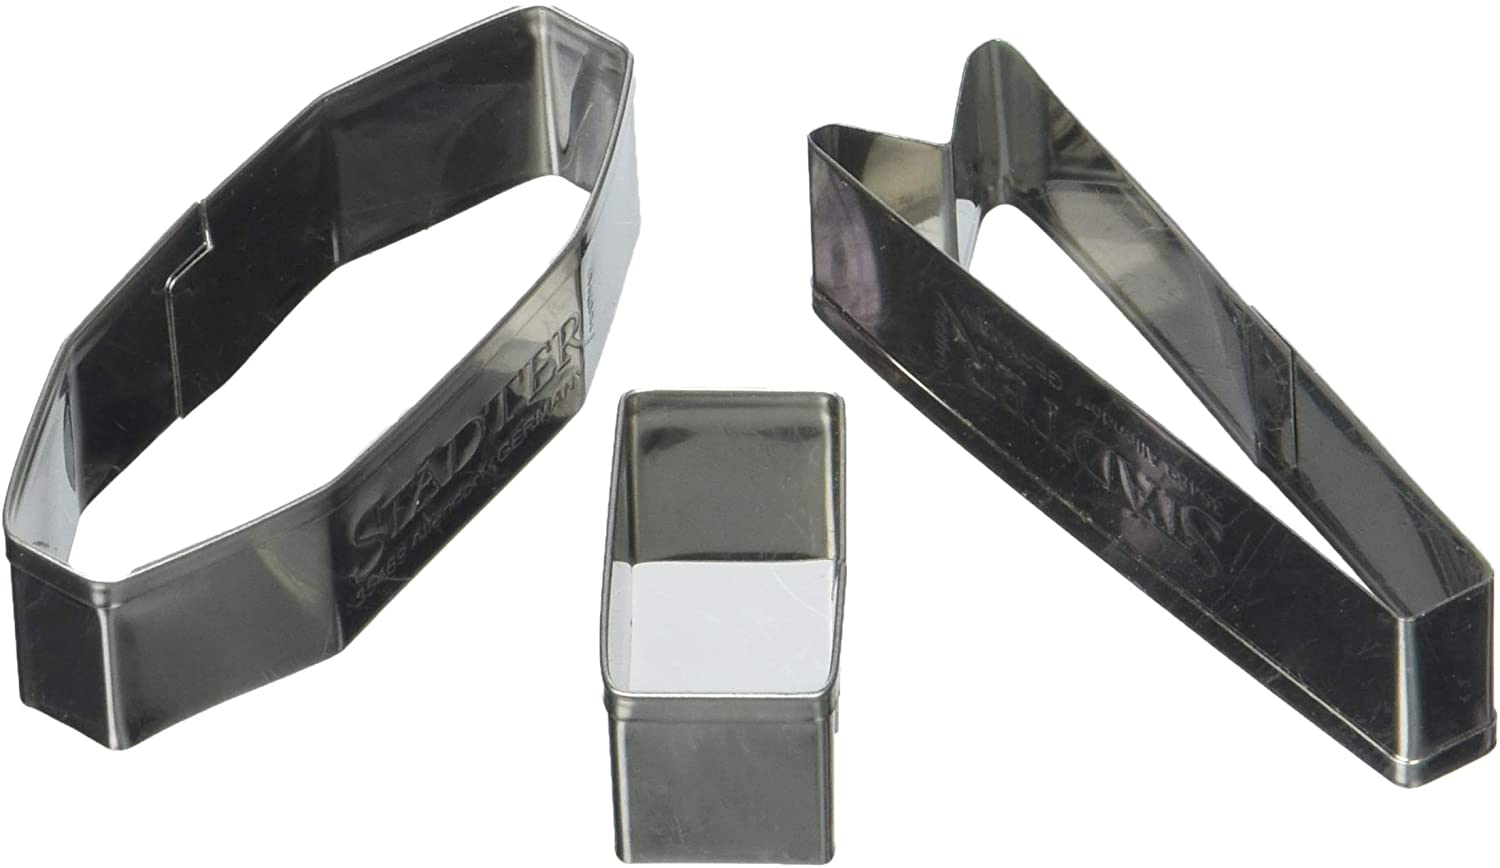 Staedter Städter 171435 Shapes Ribbon Set of 3, Stainless Steel, Silver, 7 x 7 x 3 cm